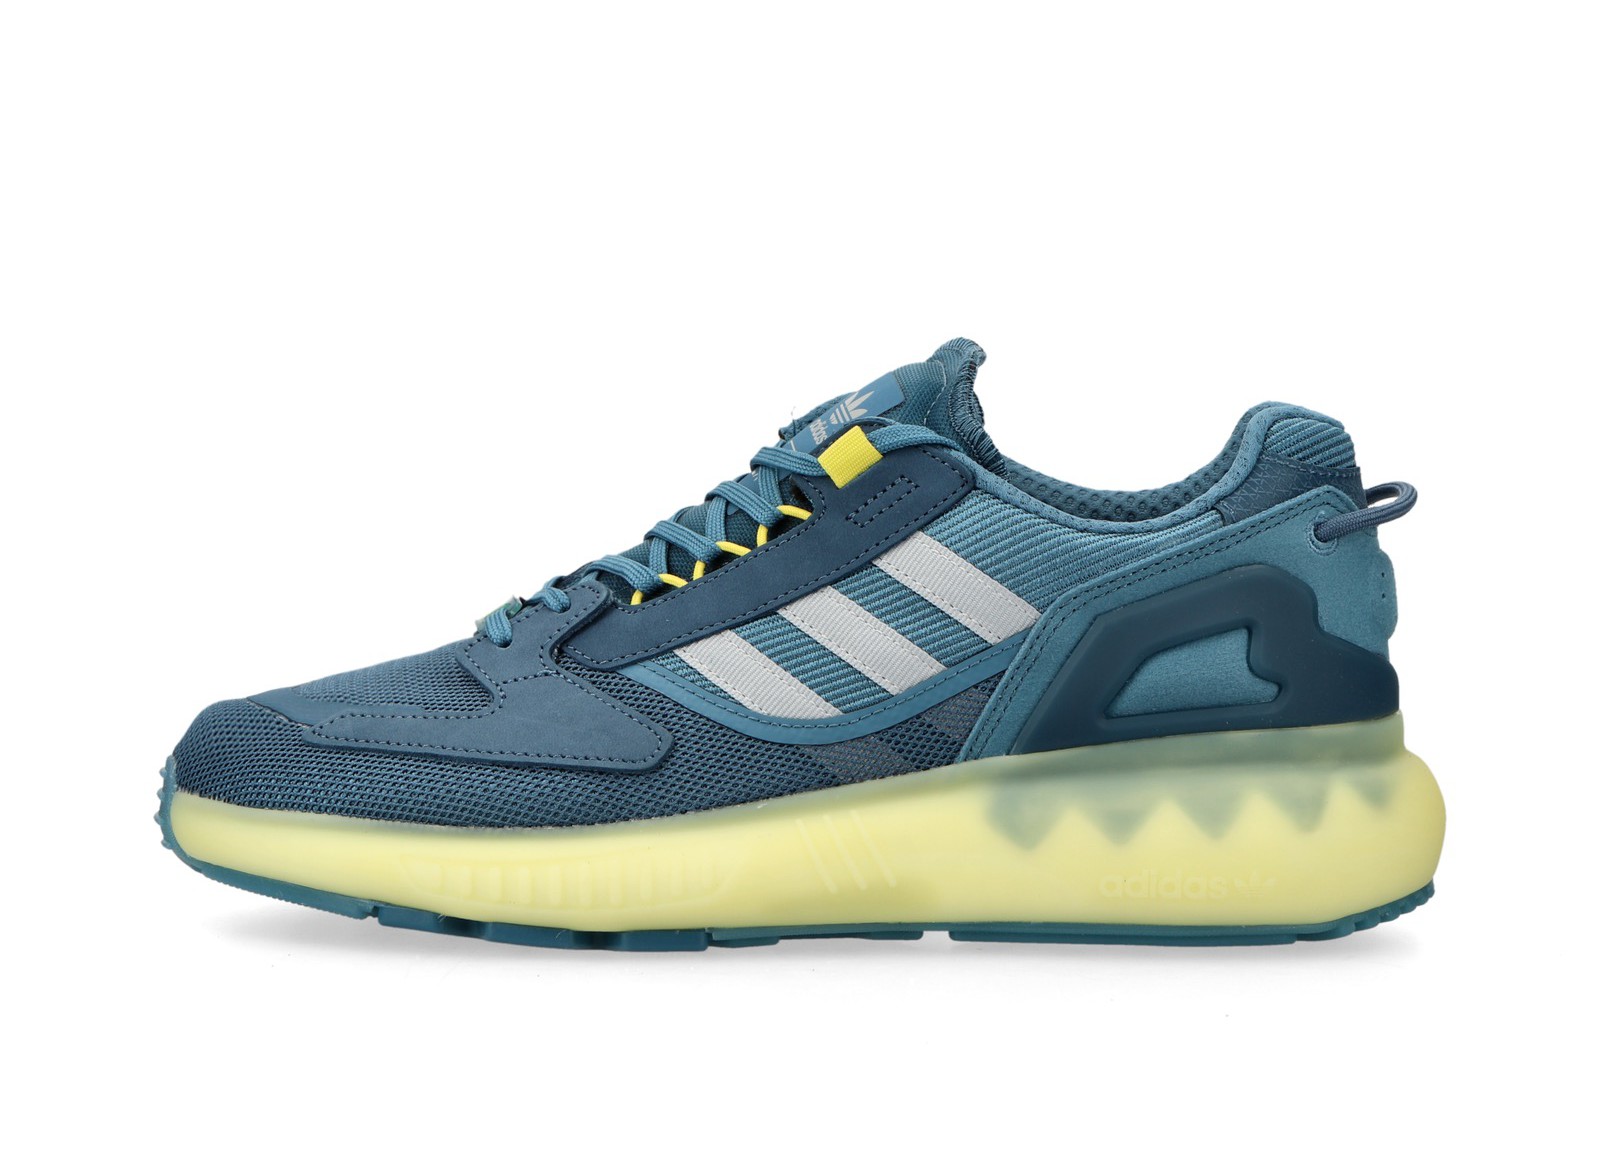 Adidas ZX 5K Boost
« Altered Blue »